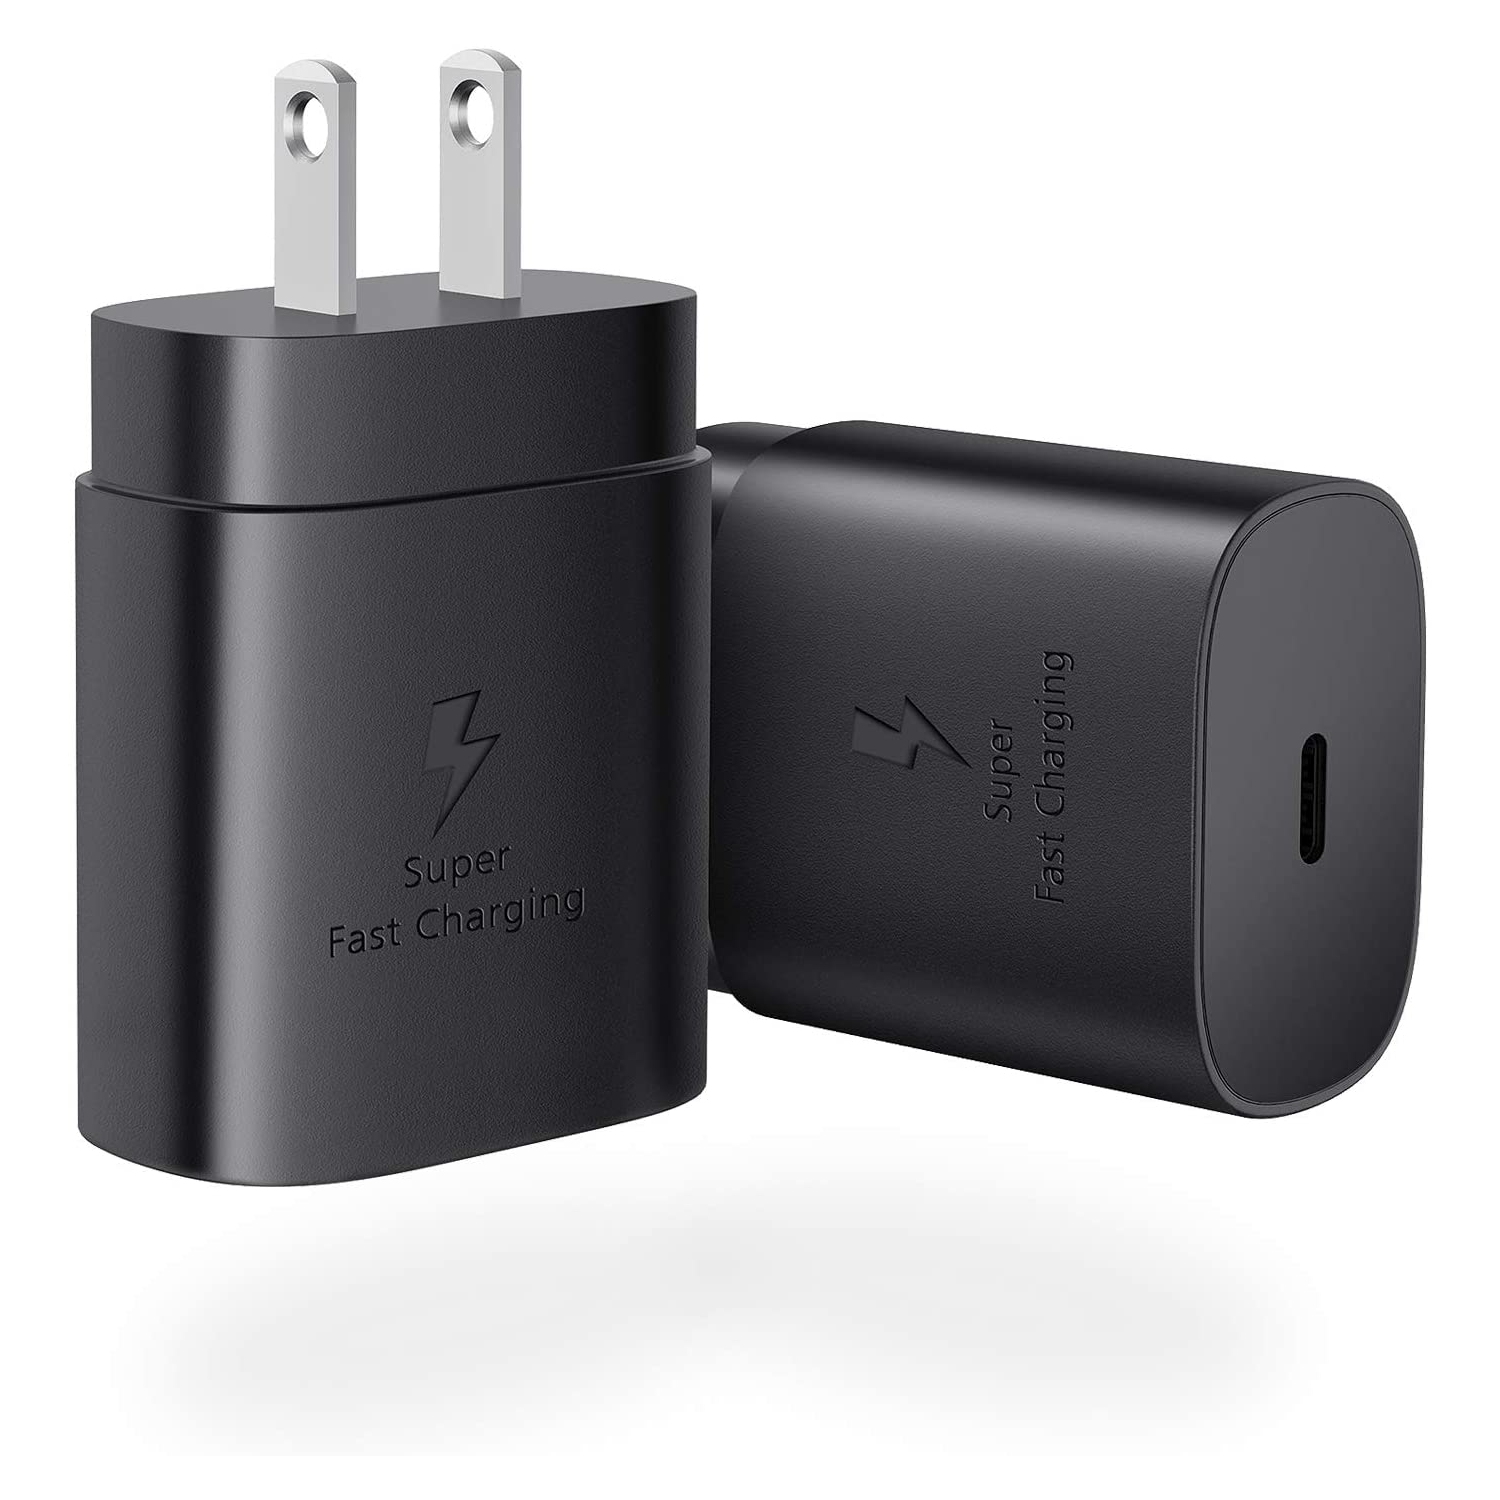 (CABLESHARK) USB C , 2Pack PD 25w Super Fast Charging COMPATIBLE with Samsung Galaxy S21/S21+/S21 Ultra/S20/ S20 Ultra/ S20 Fe/ S20+/ Note 20/ Note 20 Ultra/Note 10/ Note 10+, Google Pixel XL